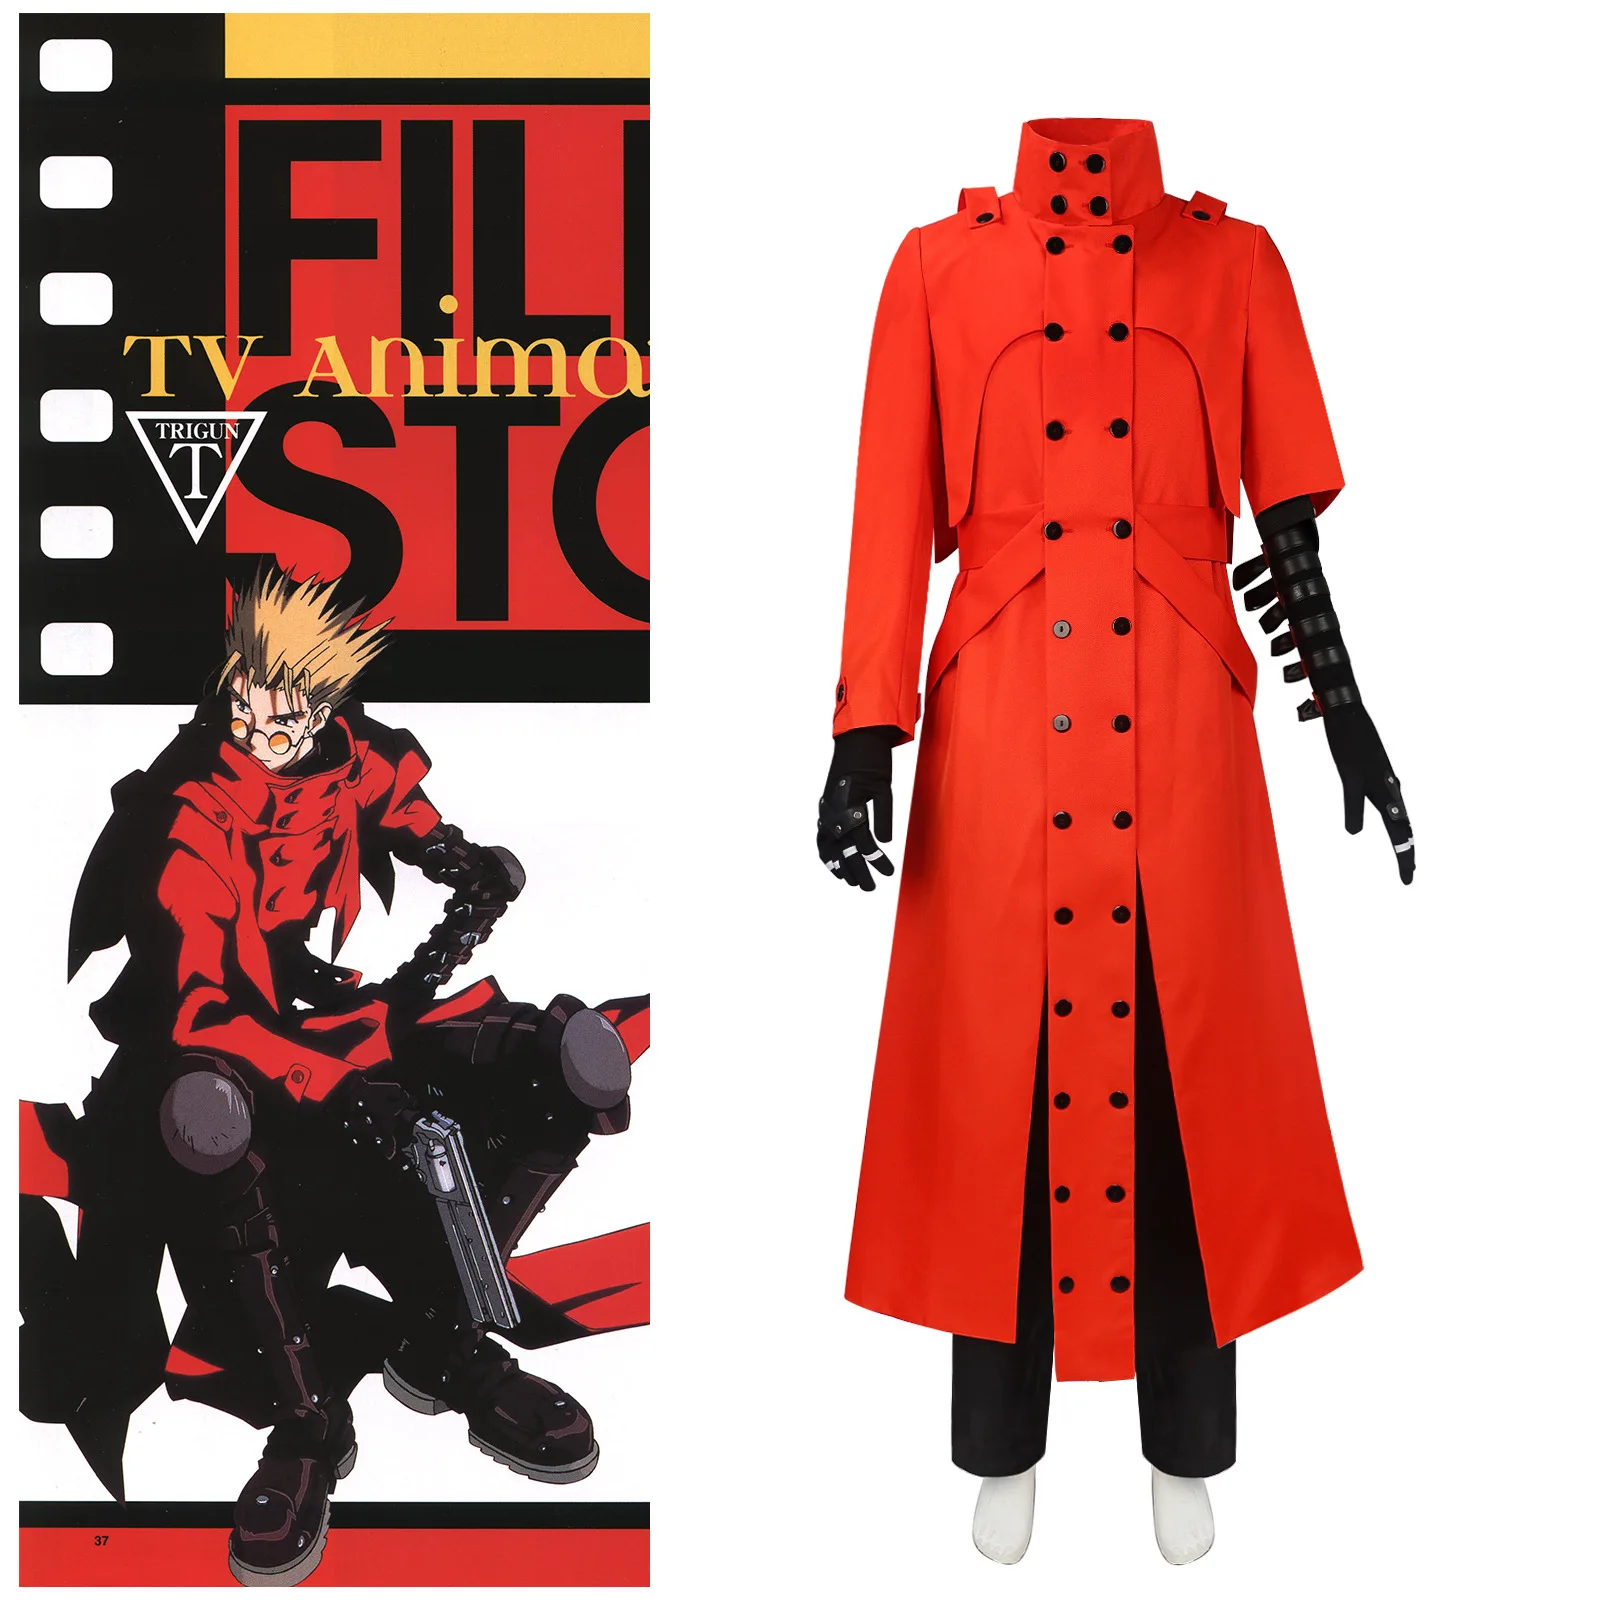 Trigun: 7 Things You Might Not Know About Vash The Stampede